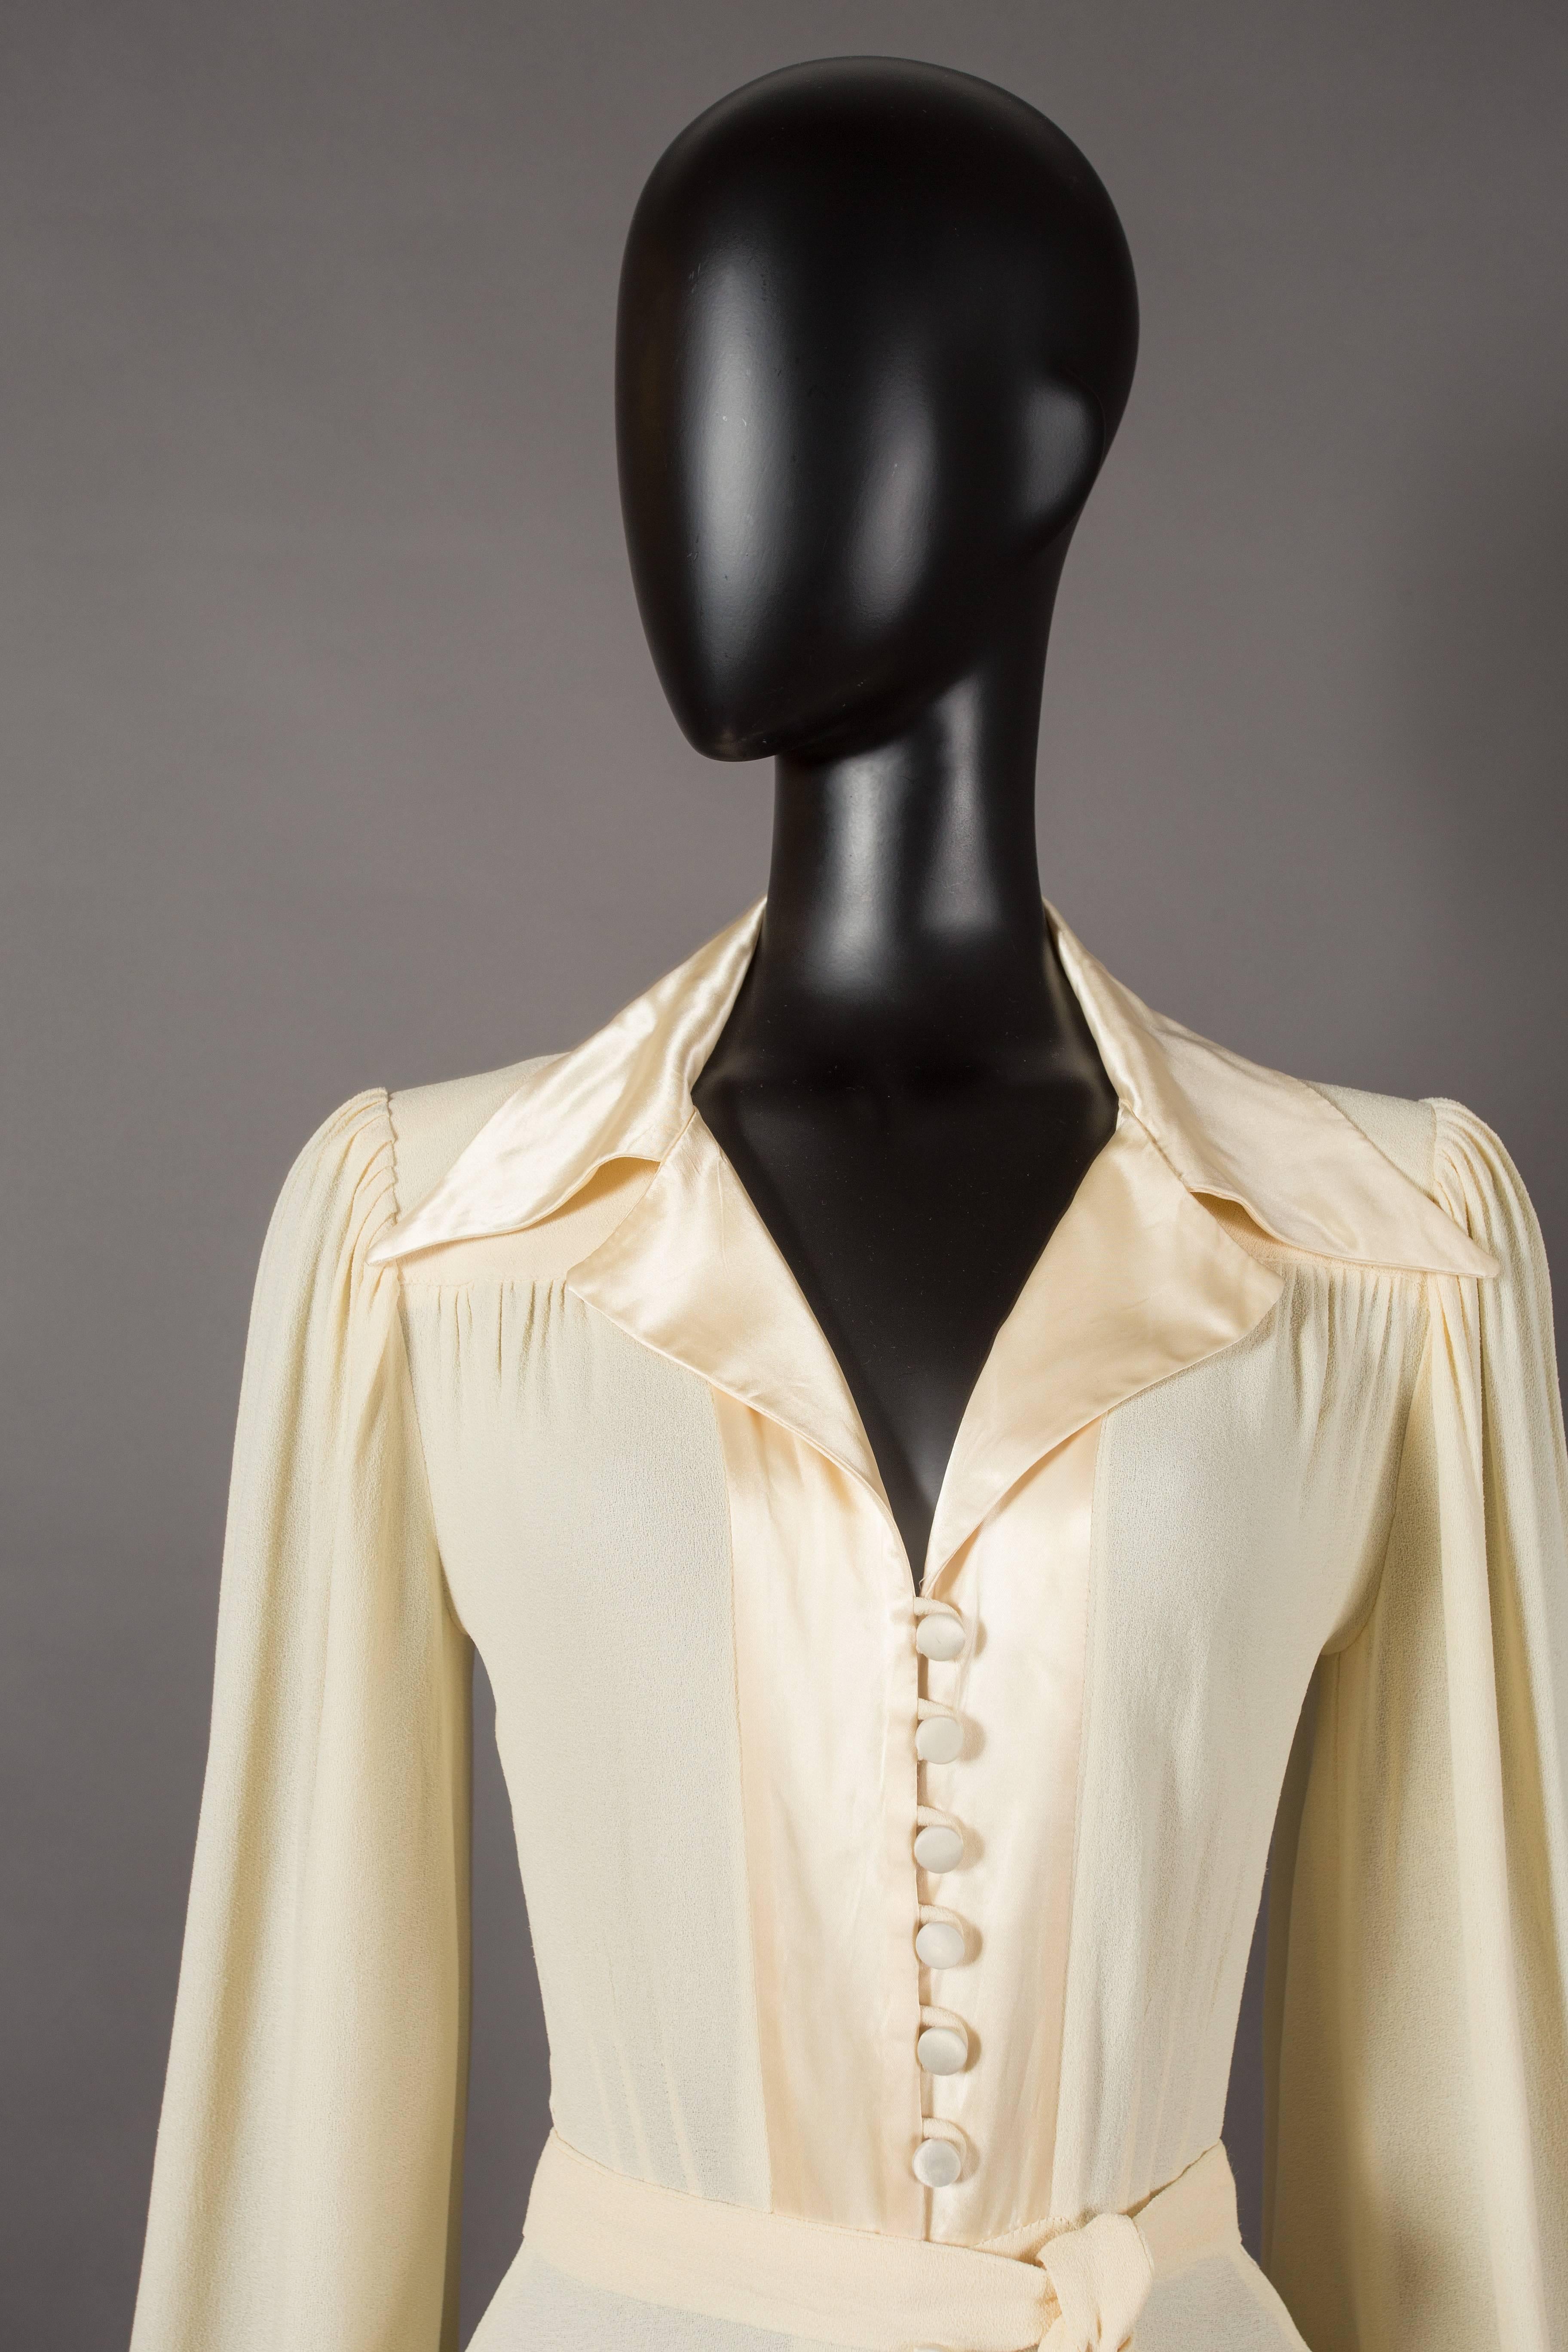 Beige Ossie Clark ivory moss crepe collared evening dress with satin trim, circa 1974